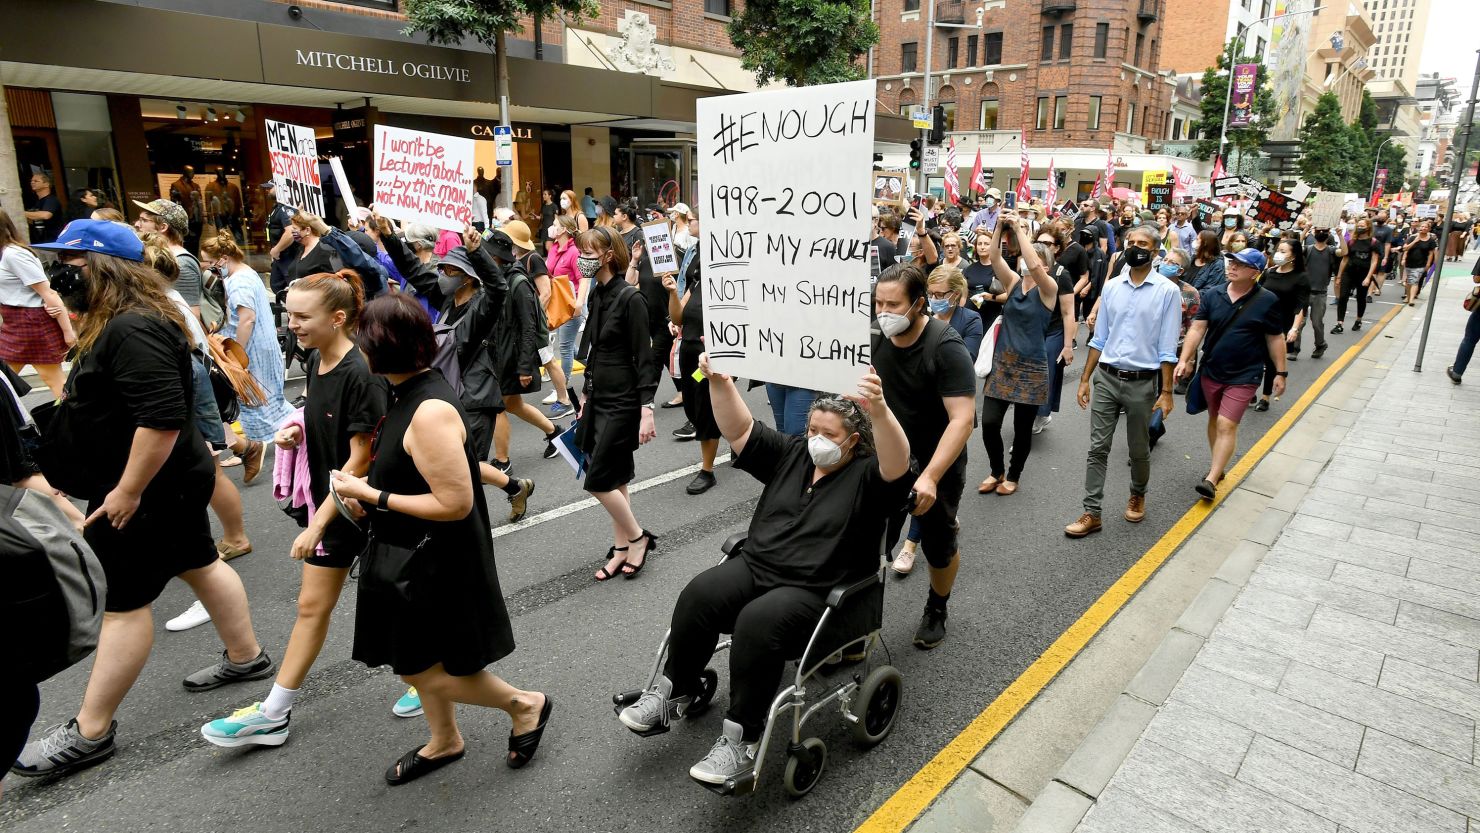 Protesters take part in the Women's March 4 Justice in Brisbane, Australia, on 15 March.